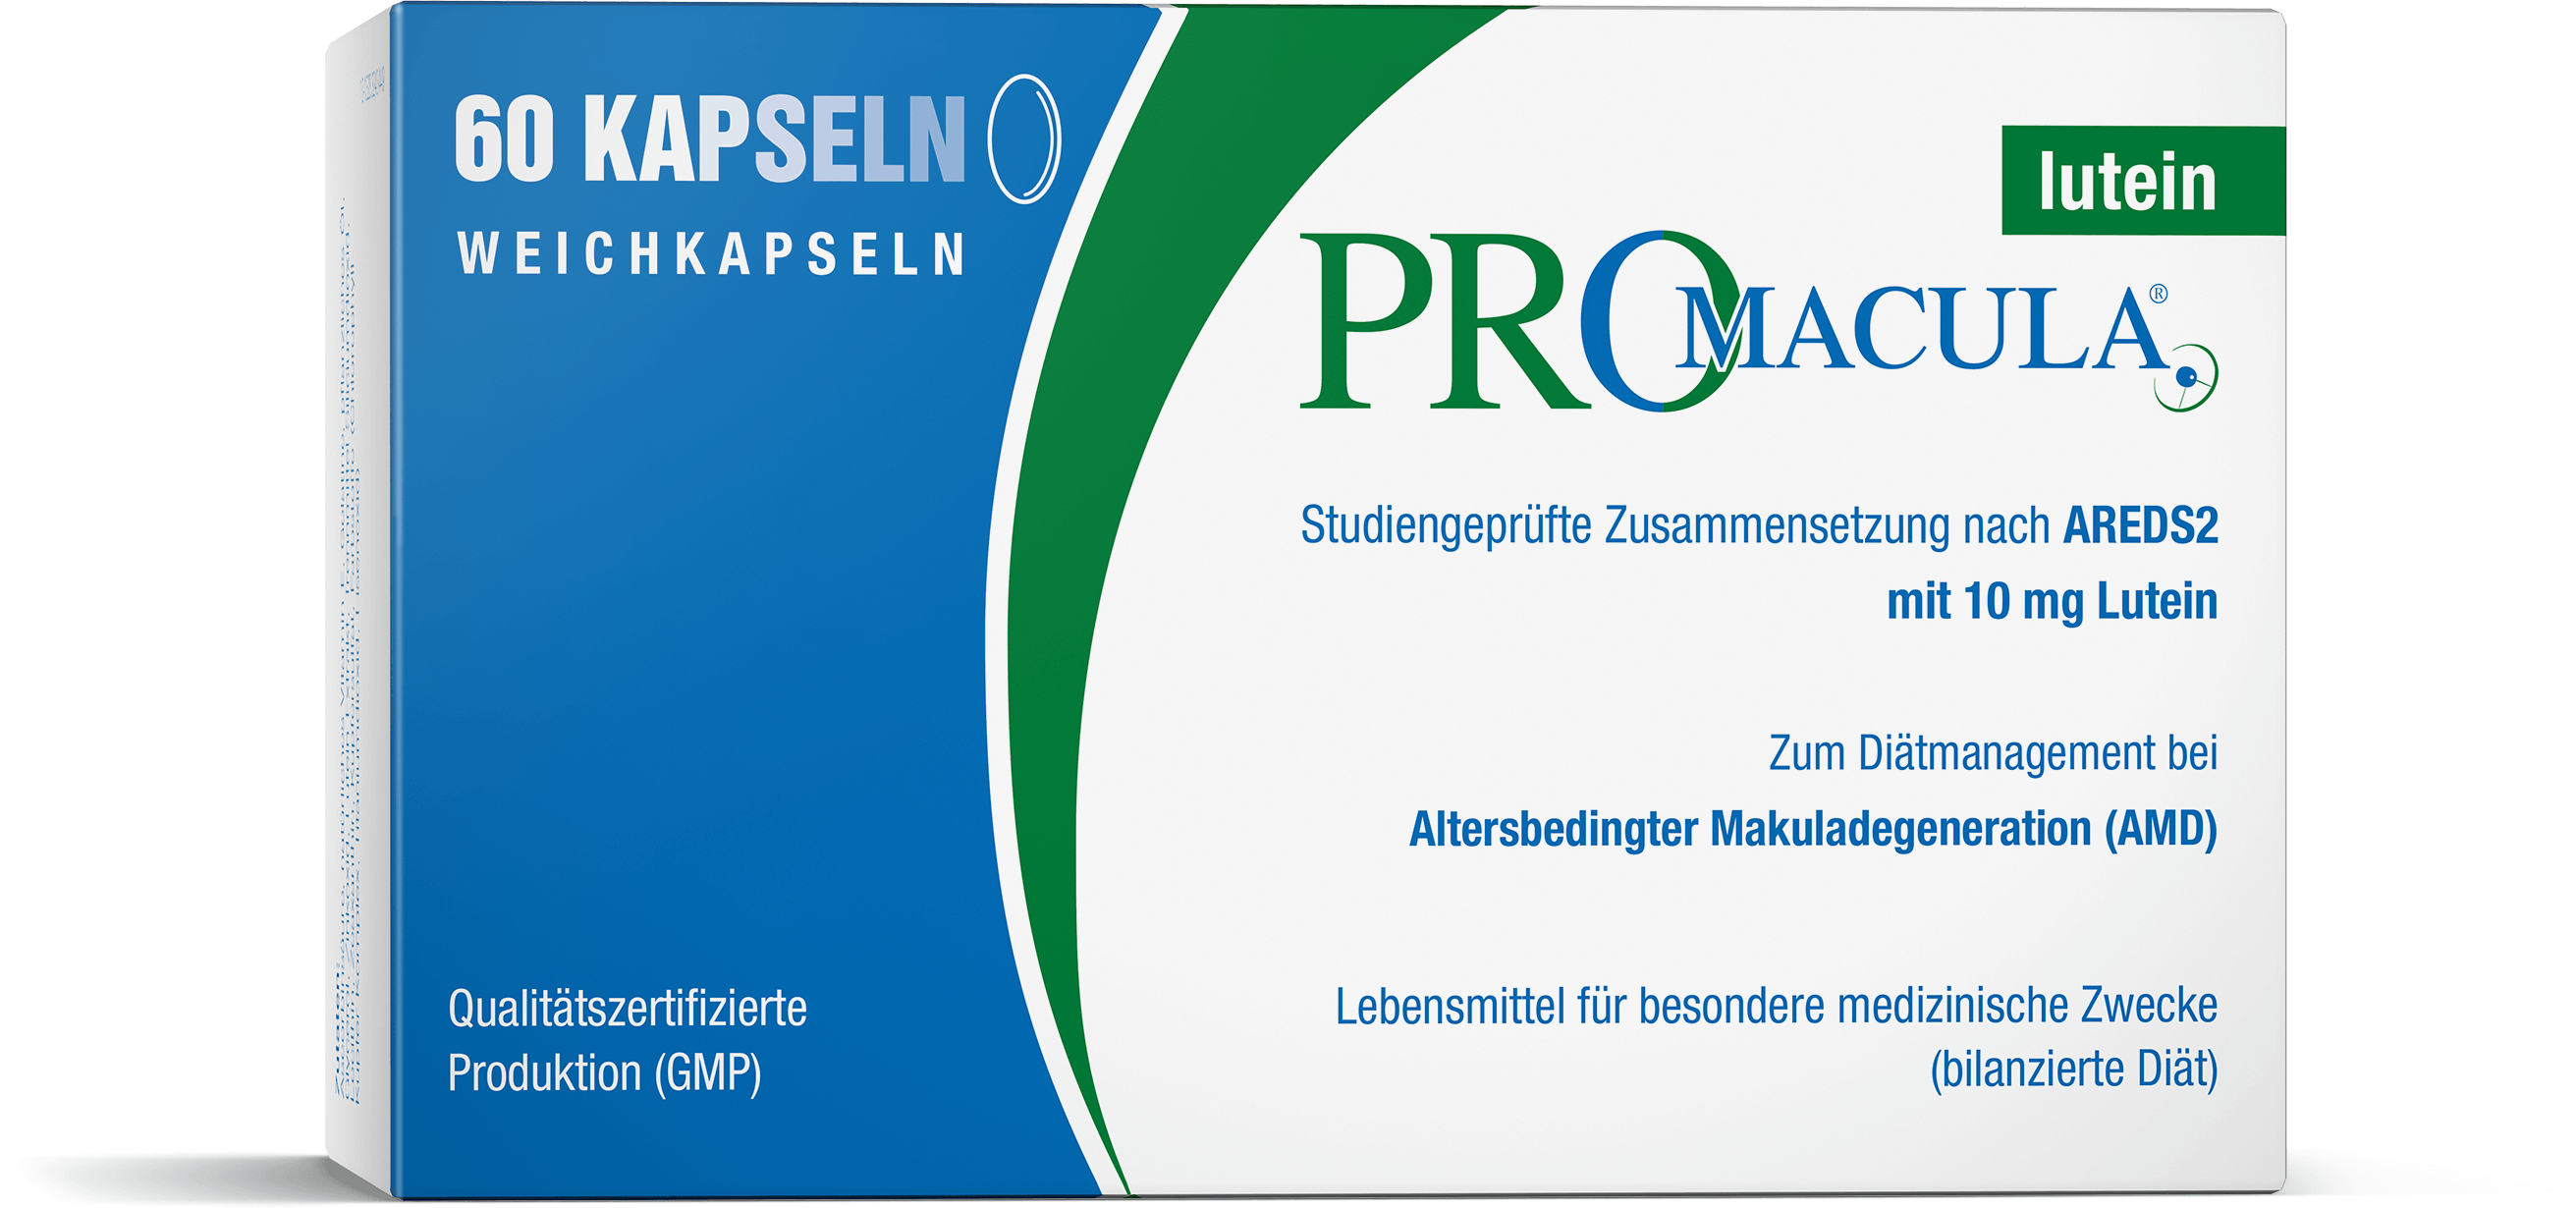 PROMACULA lutein Packung